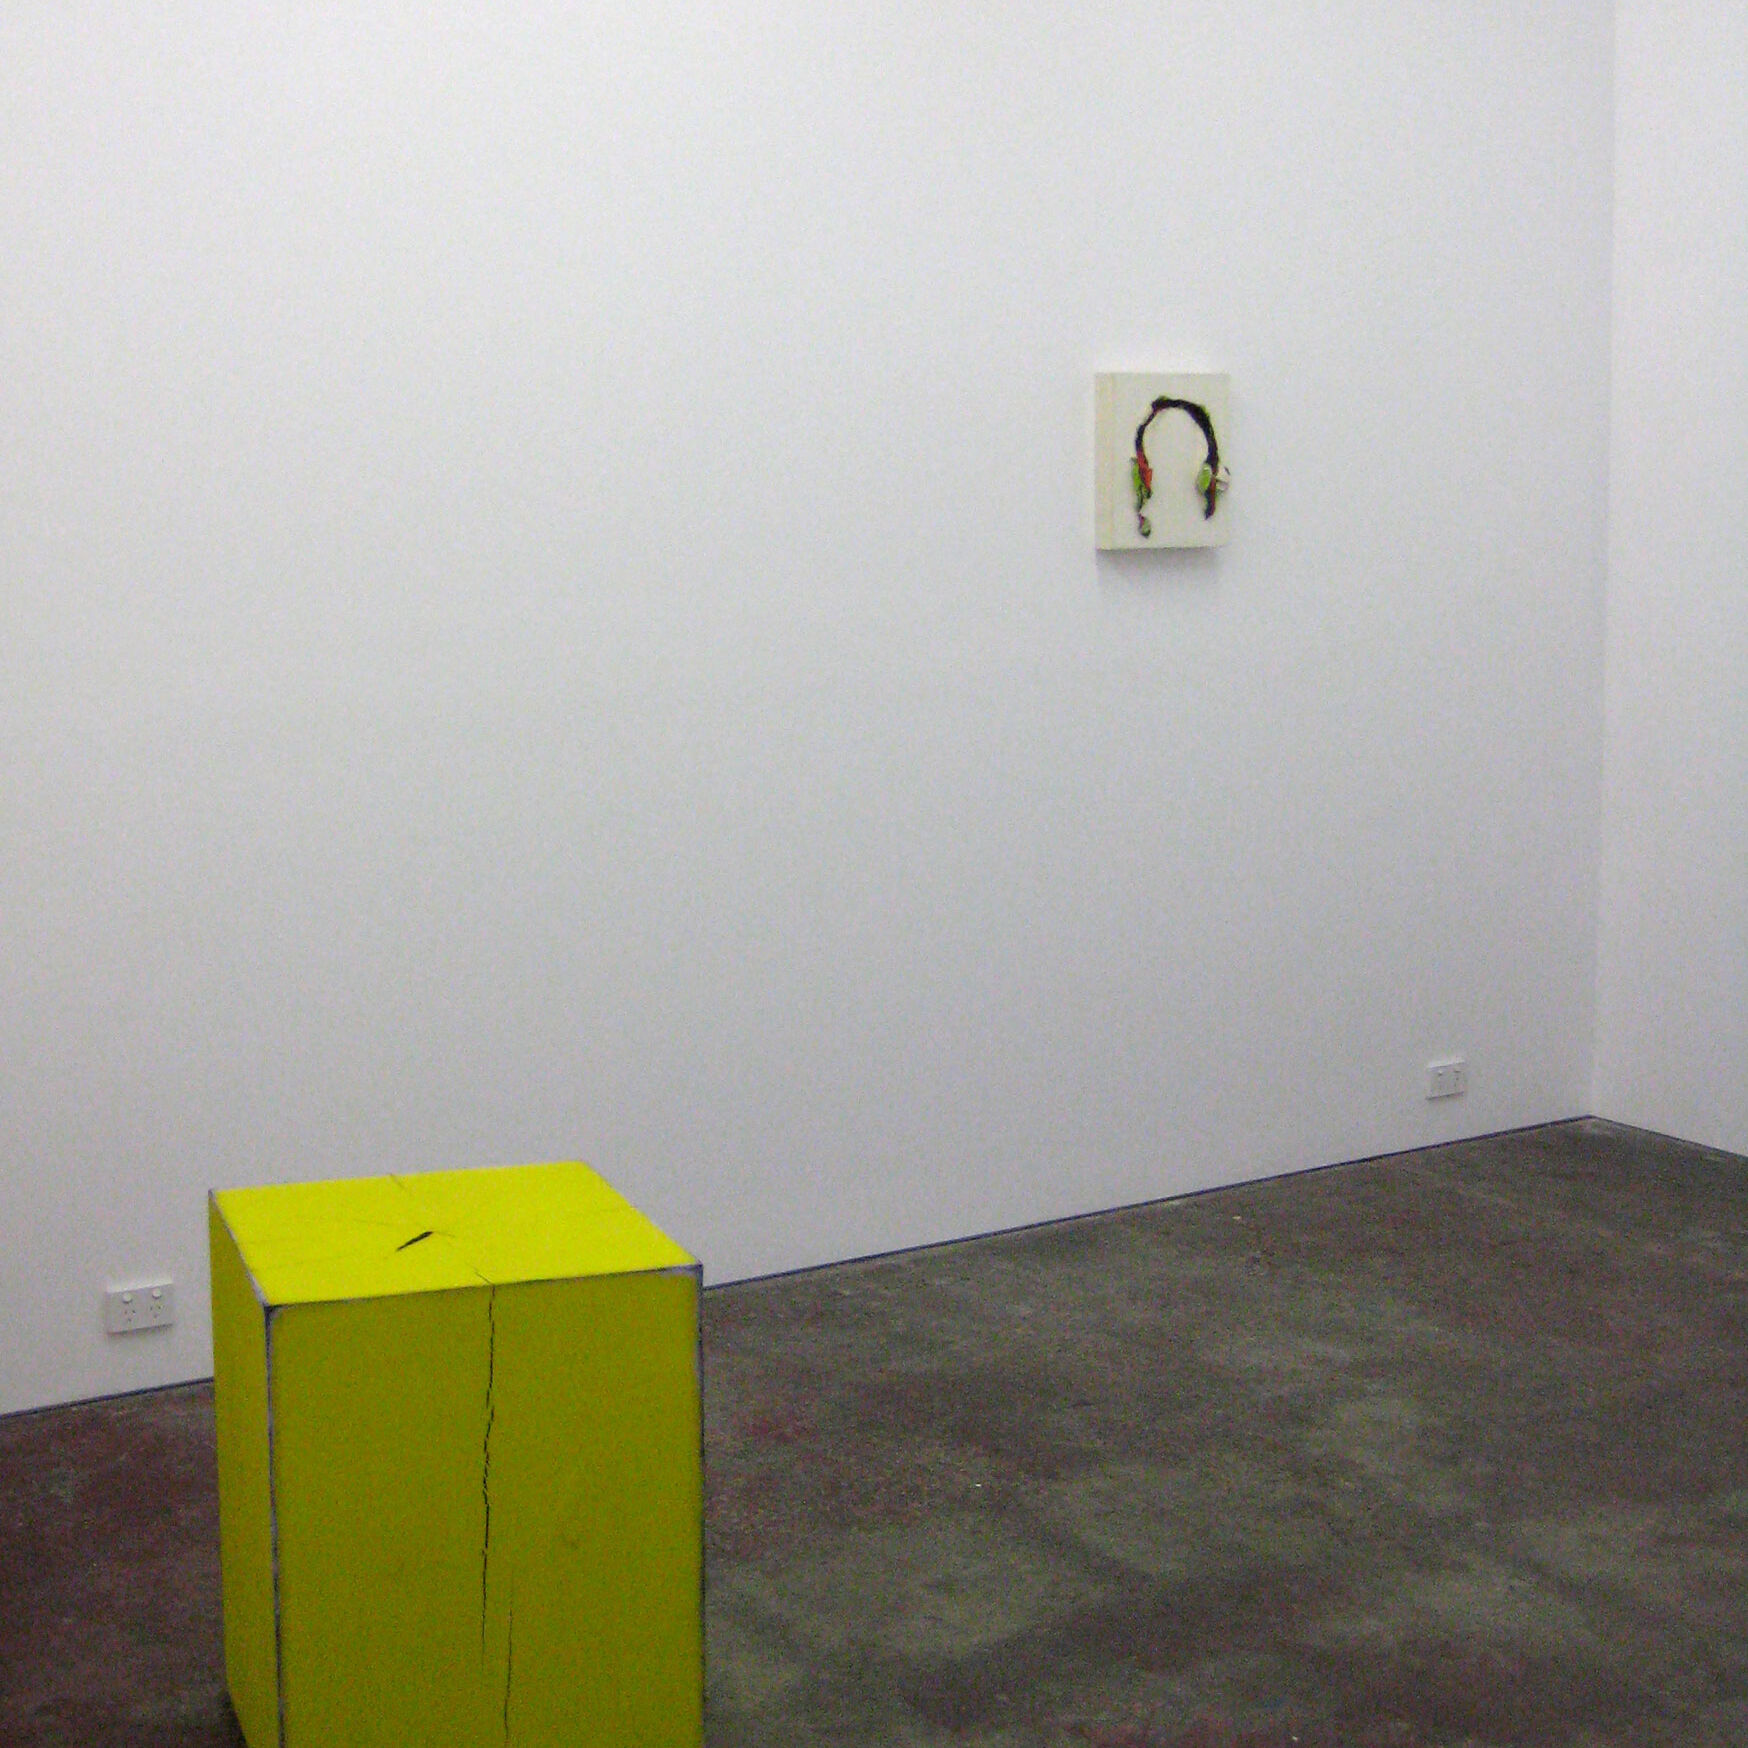 A Loose Harness For Time, 2012